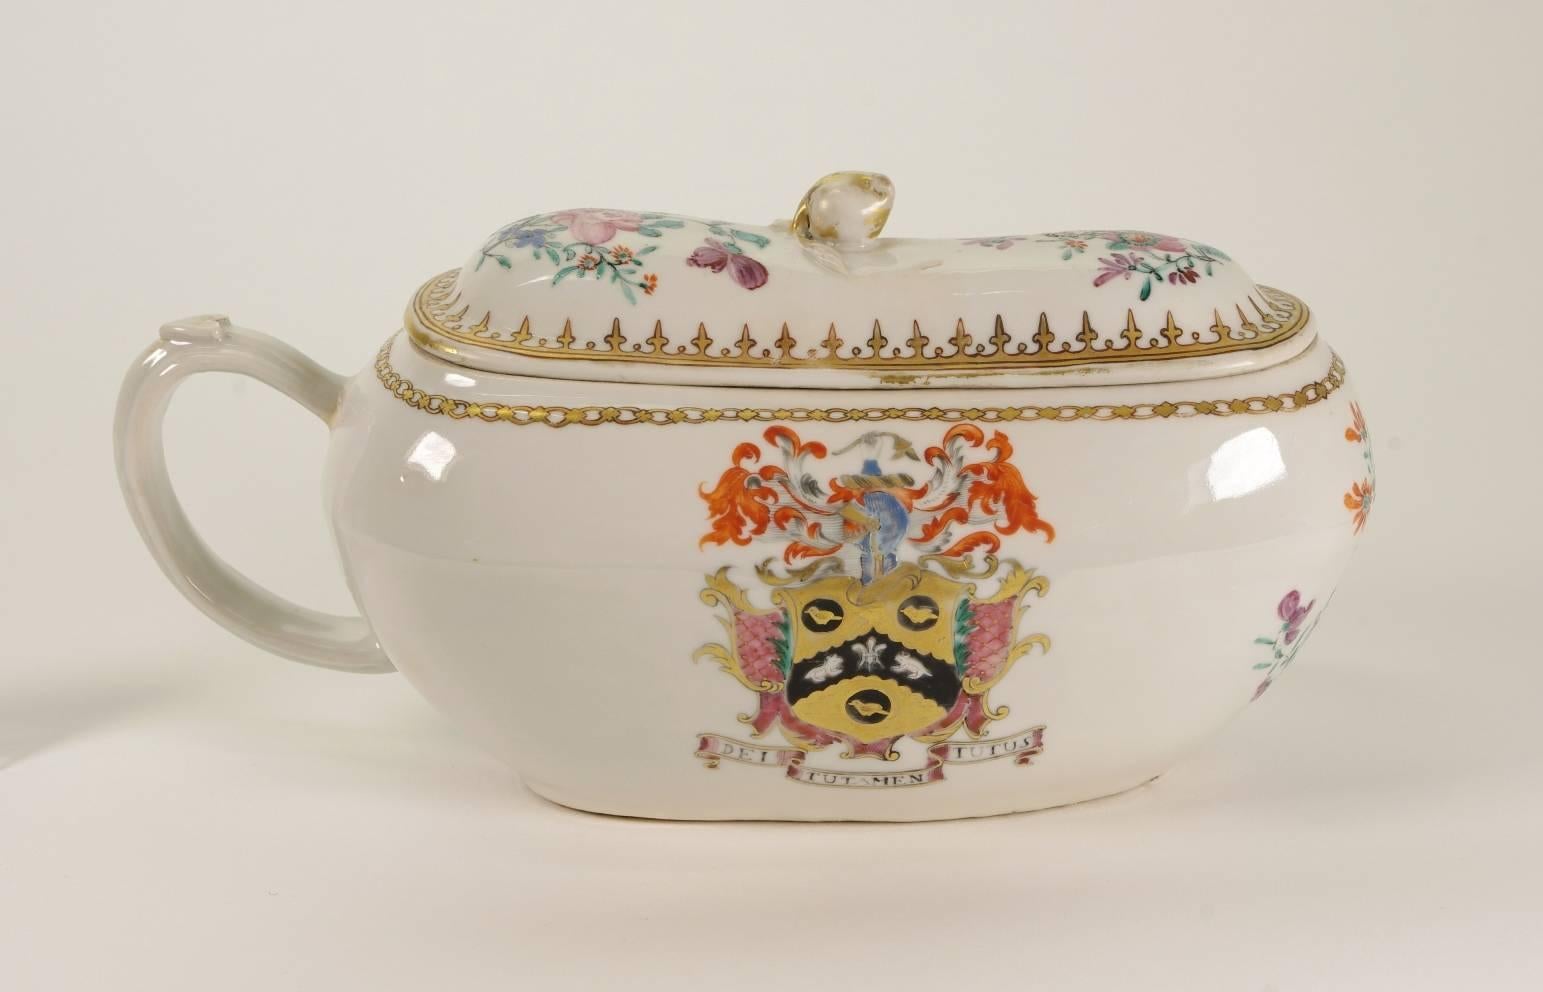 Chinese Export porcelain armorial bourdaloue, the cover with a spearhead border and gilt finial, the body with a chain border; each piece painted with flower sprays; the handle with a heart shaped thumb-piece, decorated with the arm of